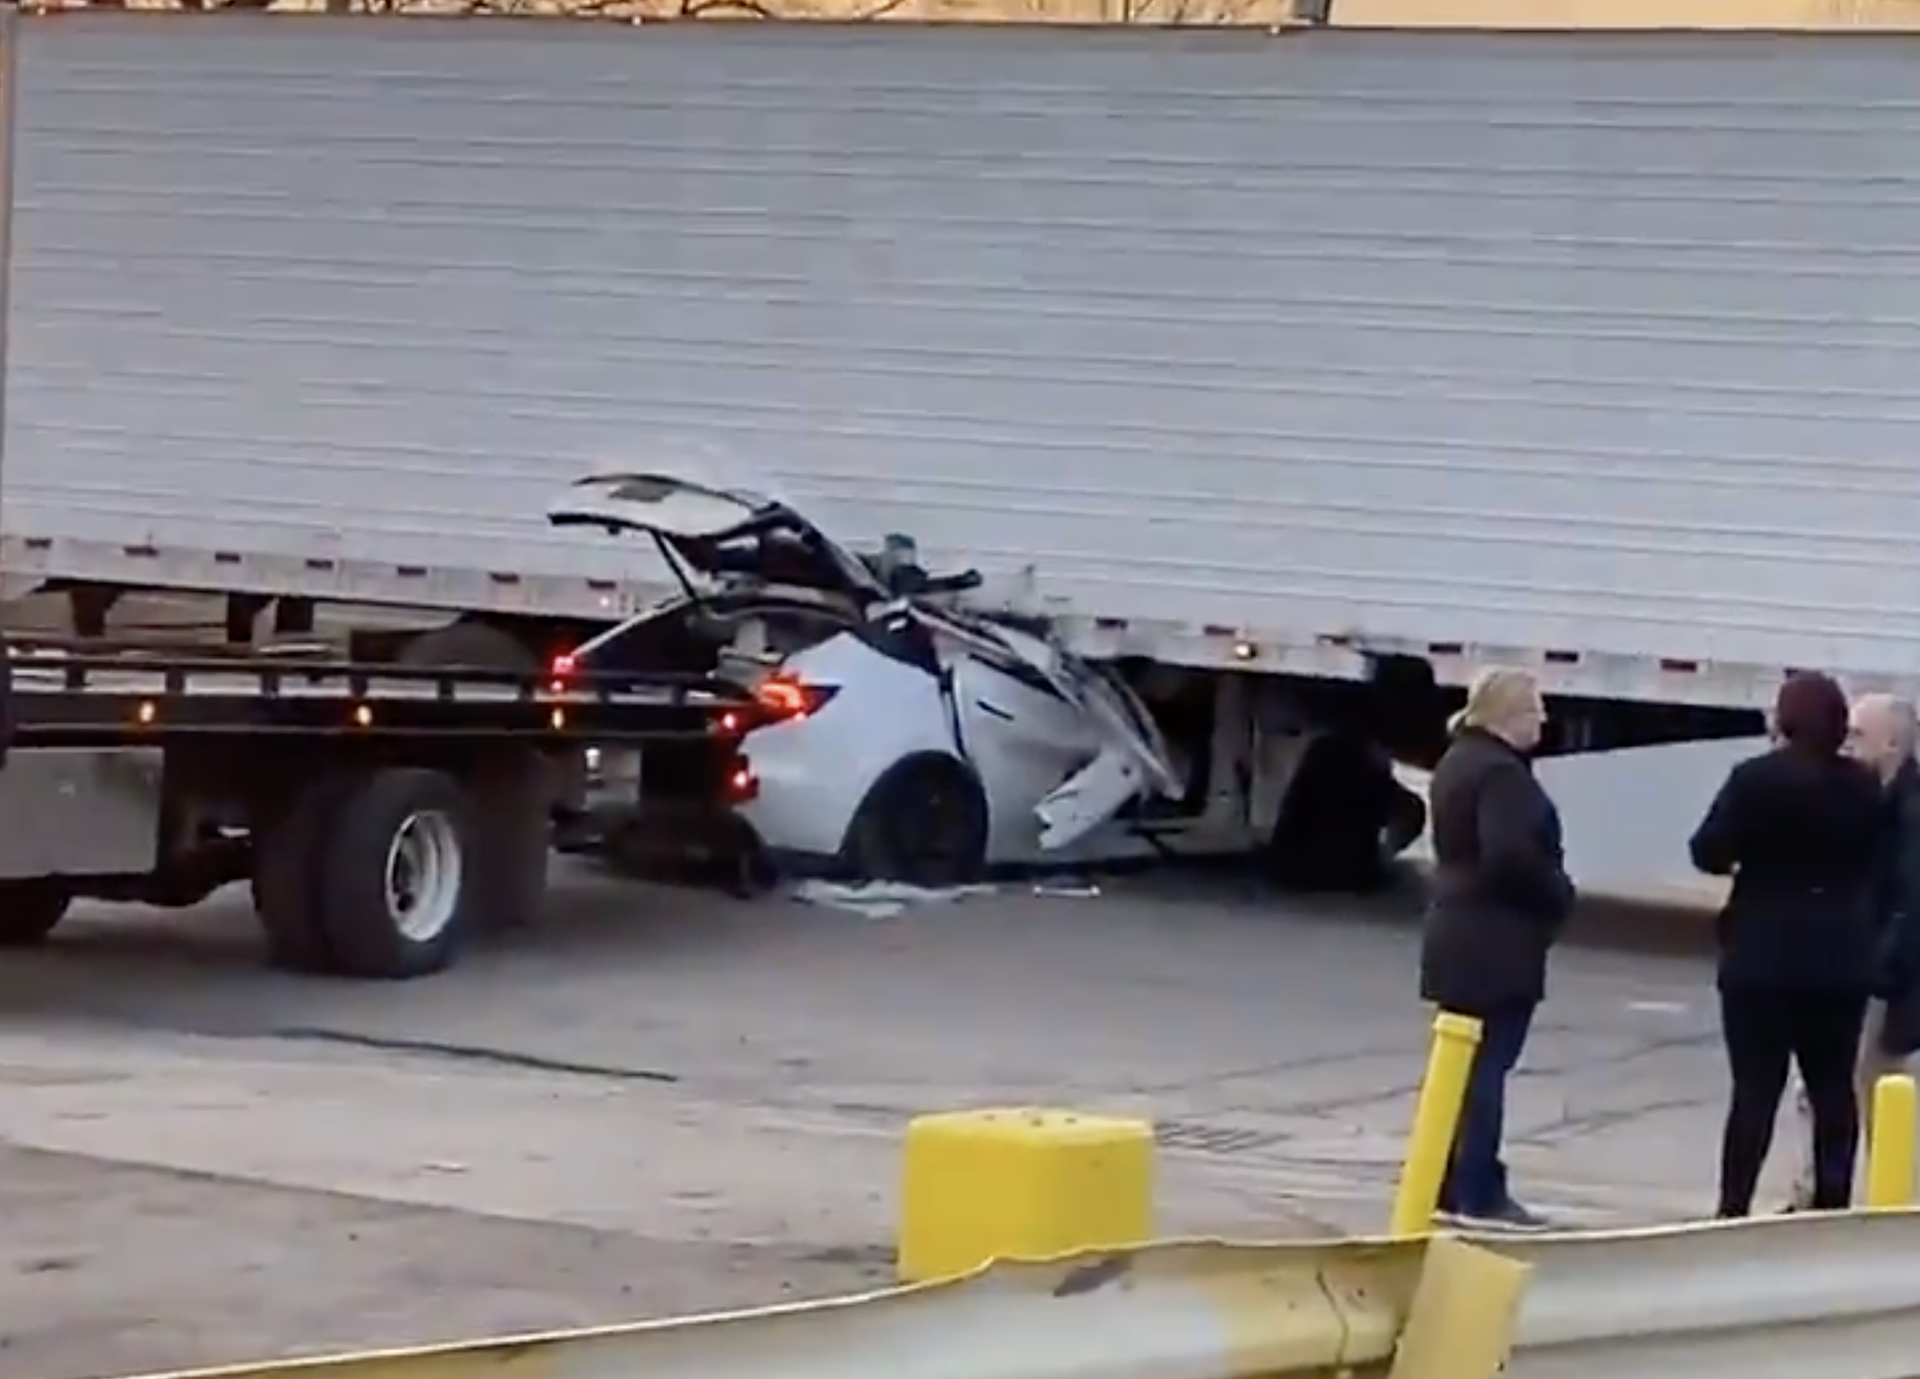 An image of a Tesla Model Y that crashed into a semi truck.